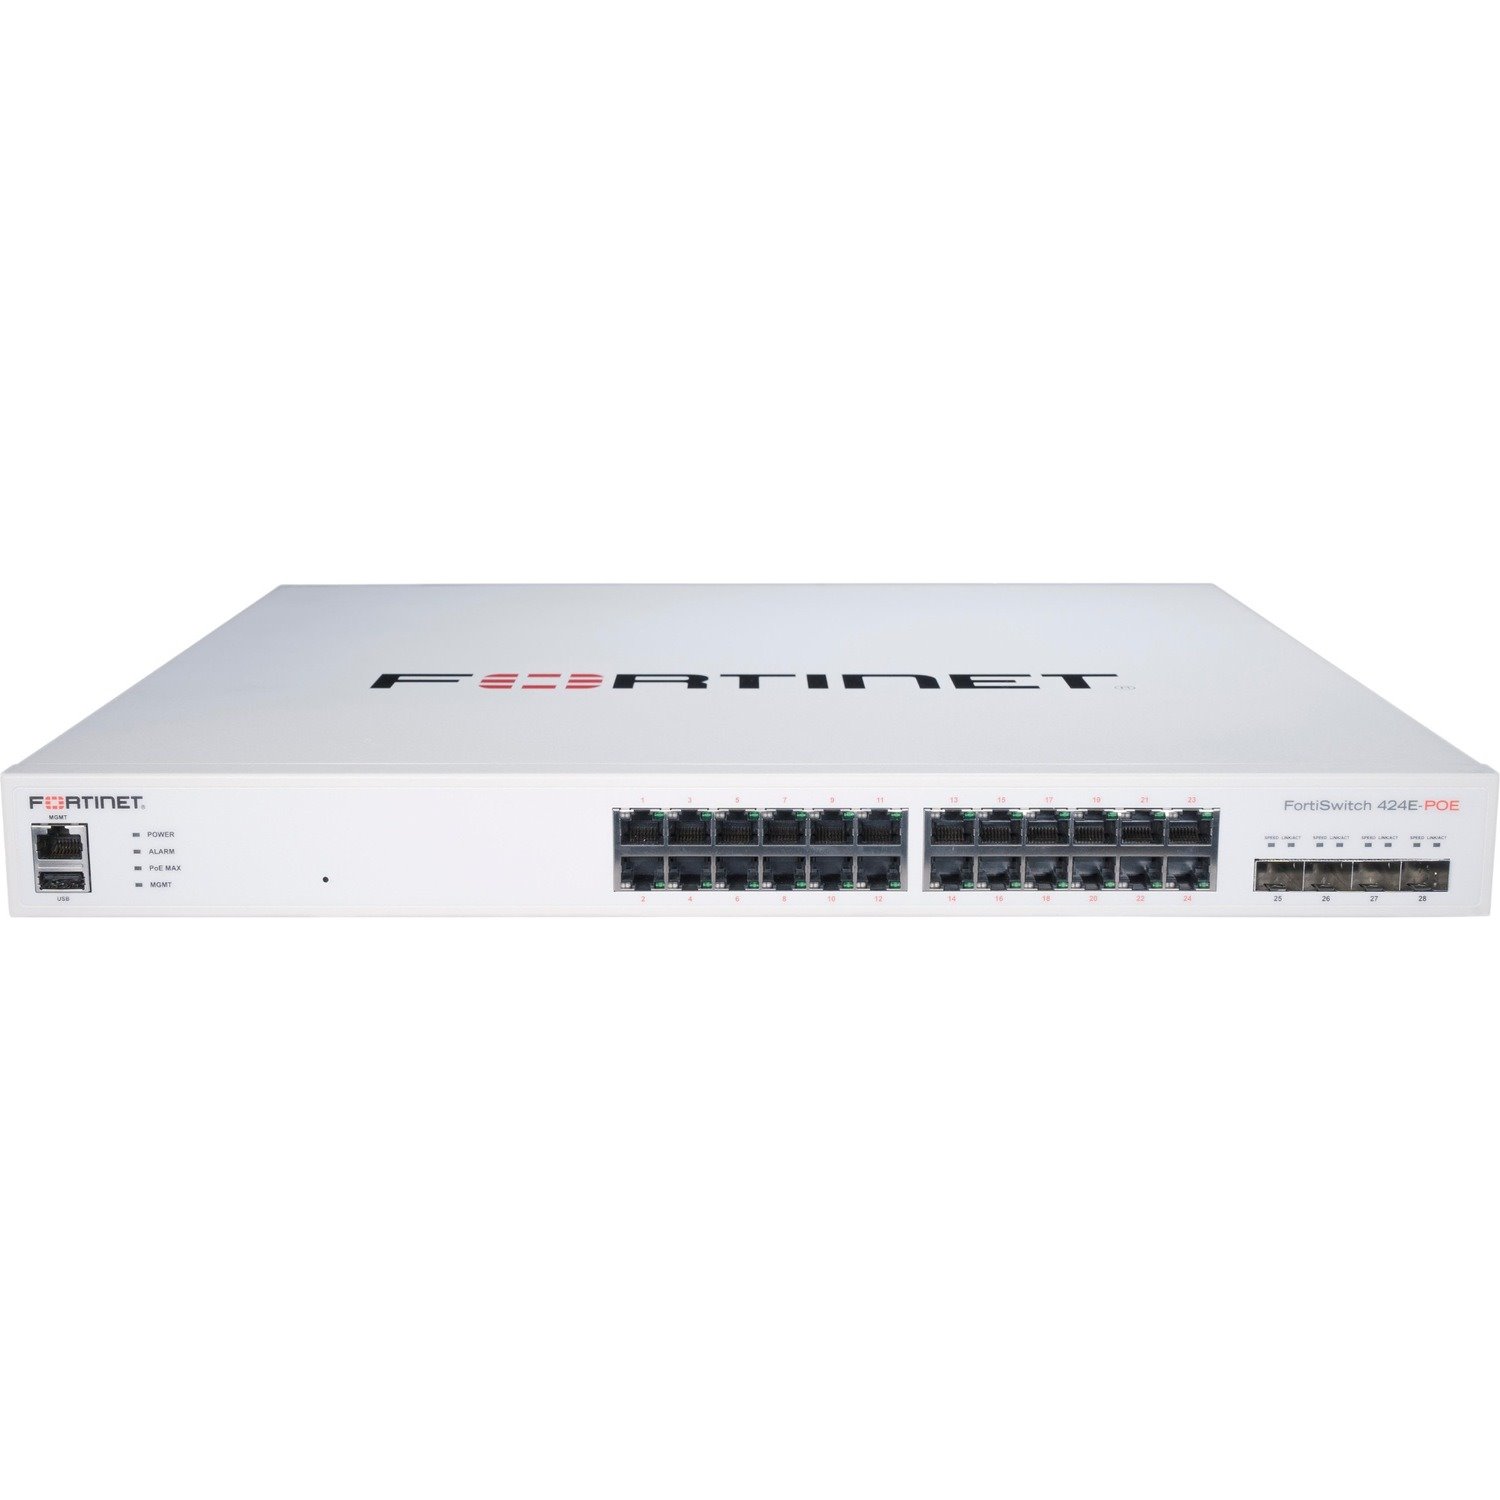 Fortinet FortiSwitch 400 FS-424E-POE 24 Ports Manageable Layer 3 Switch